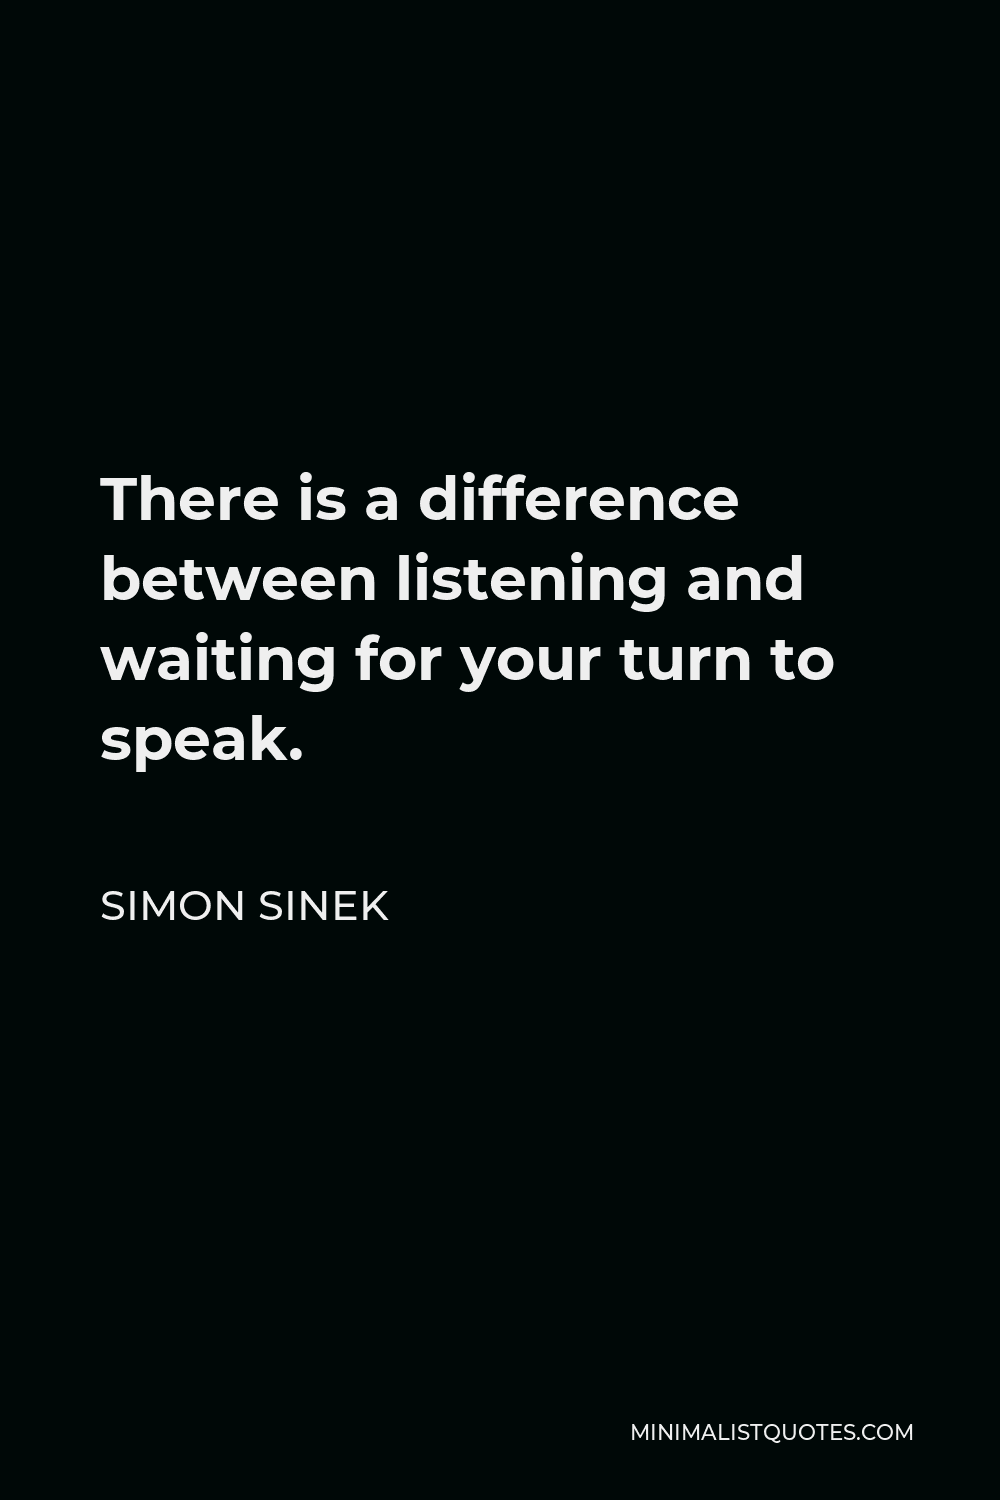 Simon Sinek Quote - There is a difference between listening and waiting for your turn to speak.